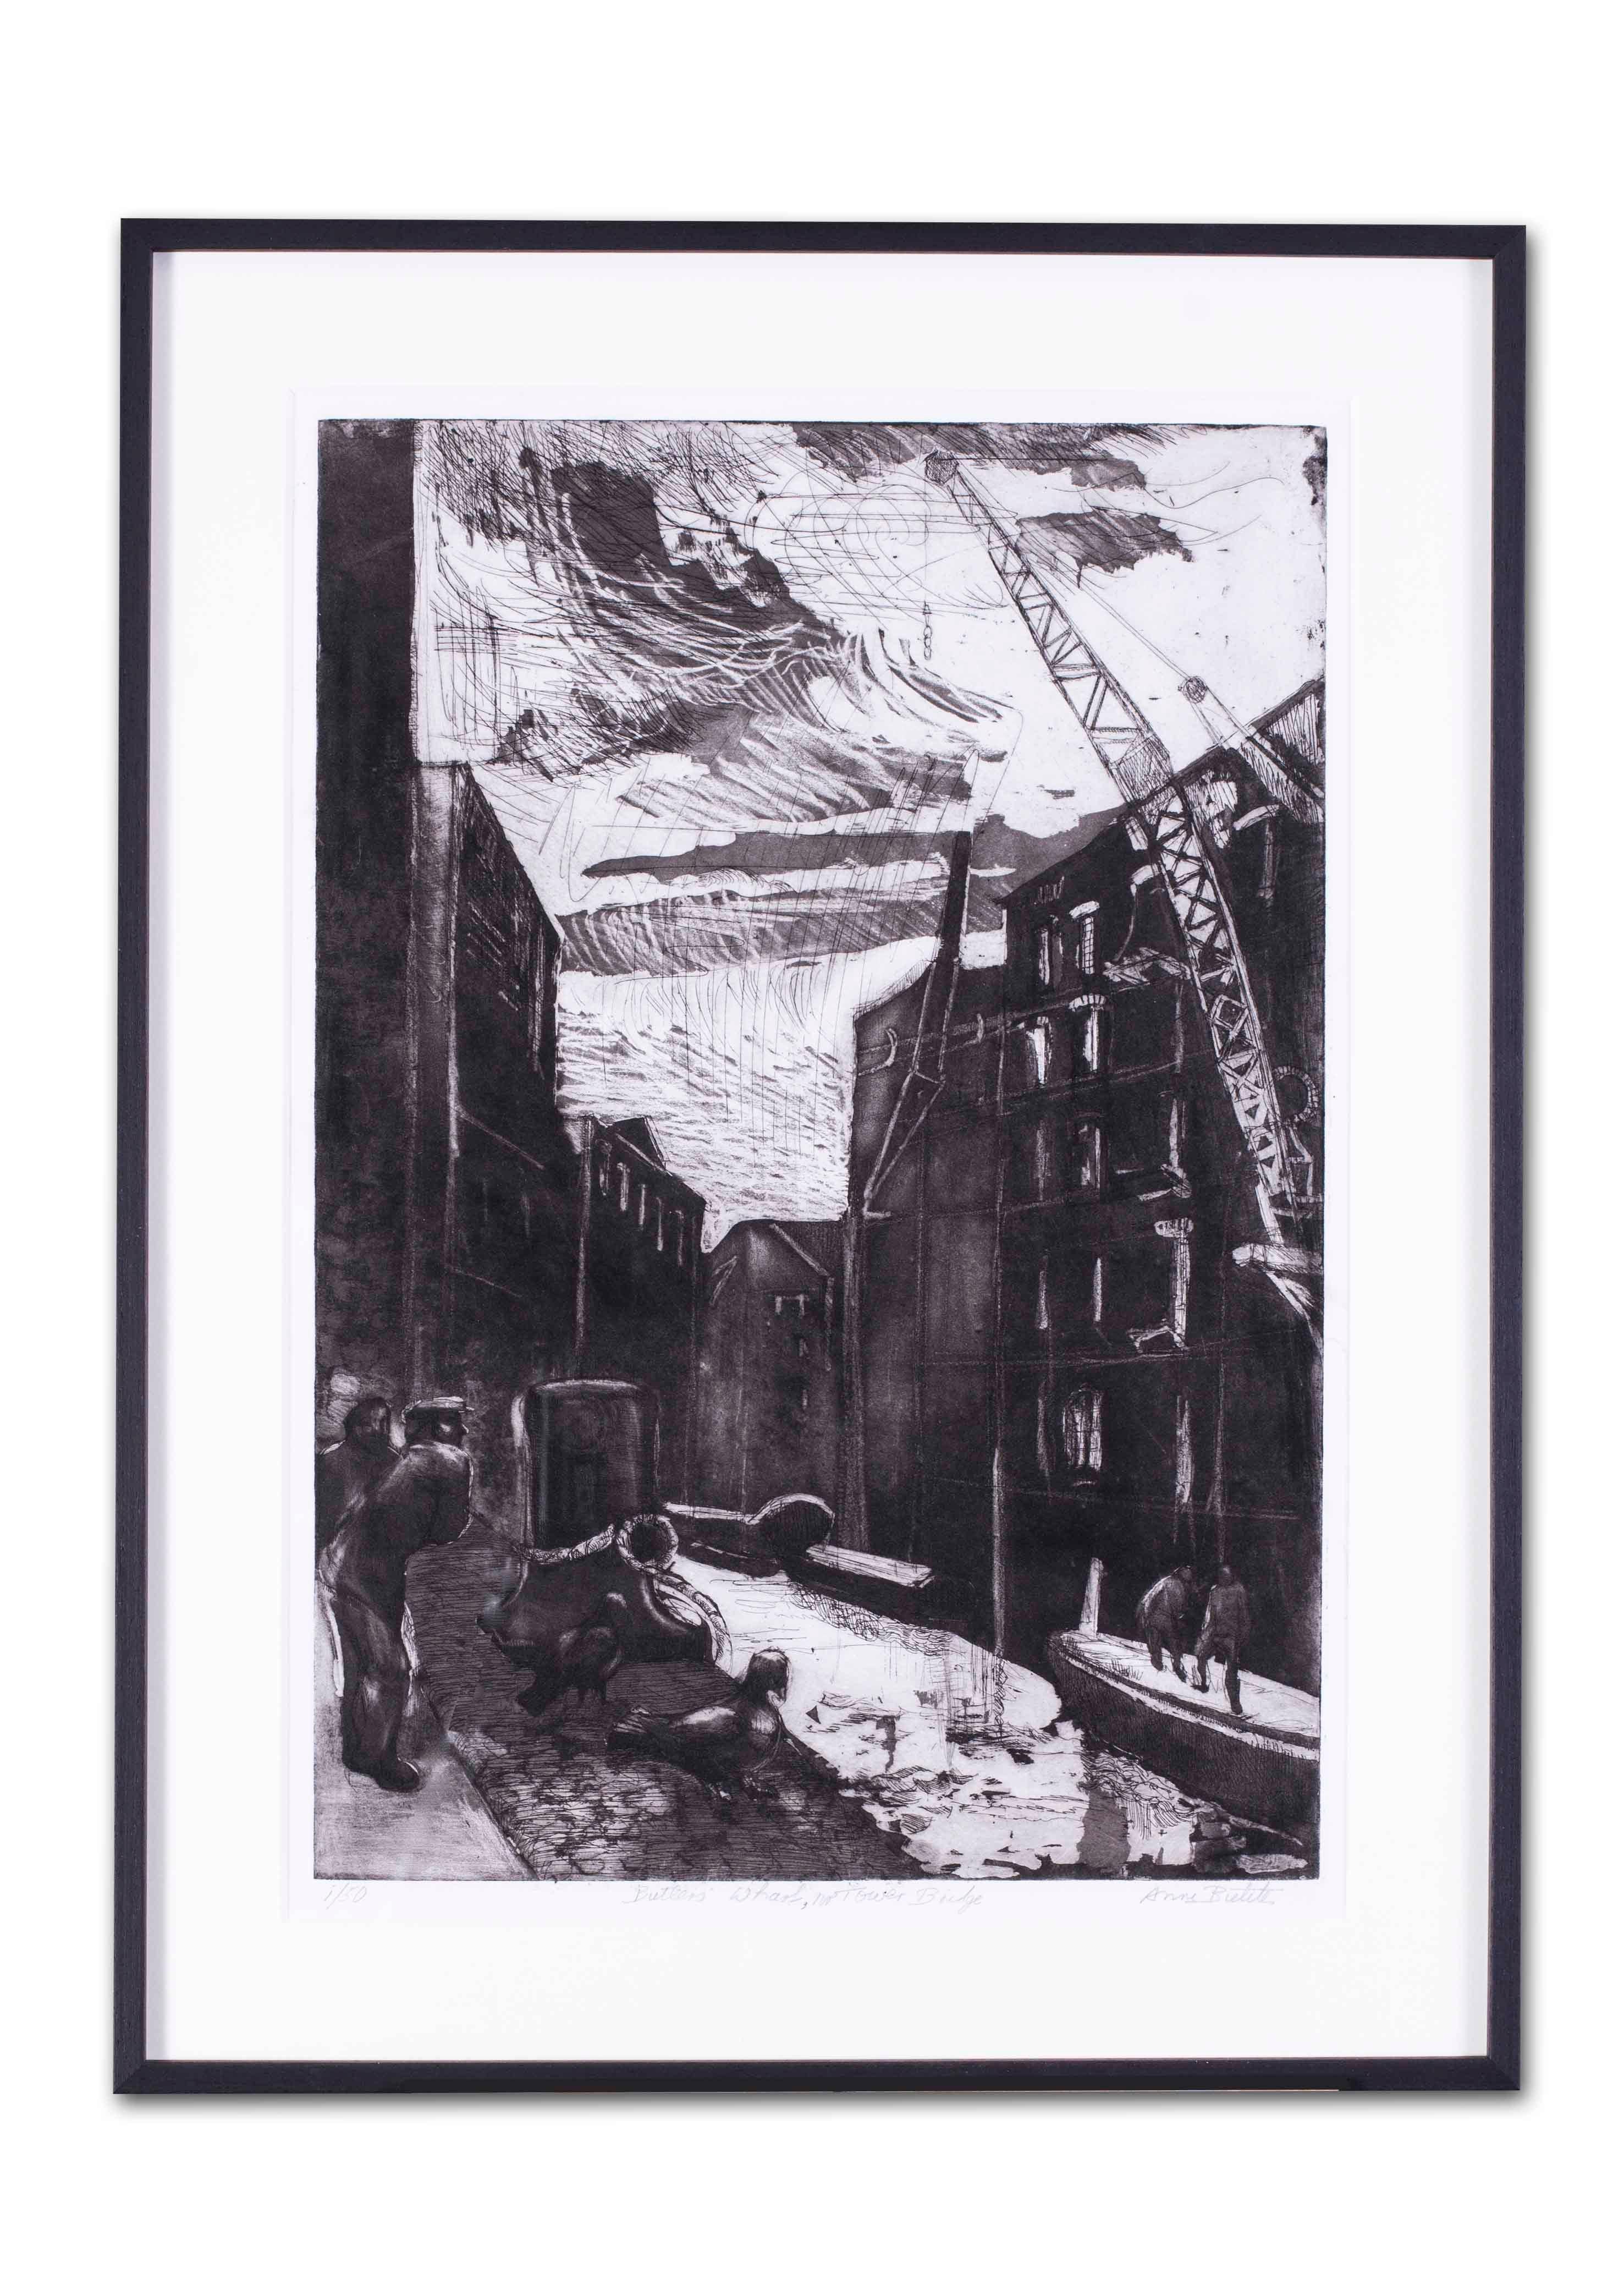 Anne Bulitis (British, 20th Century)
Butler’s Wharf, near Towerbridge, London
Etching with Aquatint
Signed ‘Anne Bulitis’ (lower right), inscribed with title and numbered ‘1/50’ (lower left)
Plate measures 19 x 13.1/4 in. (48.5 x 33.5 cm.)
